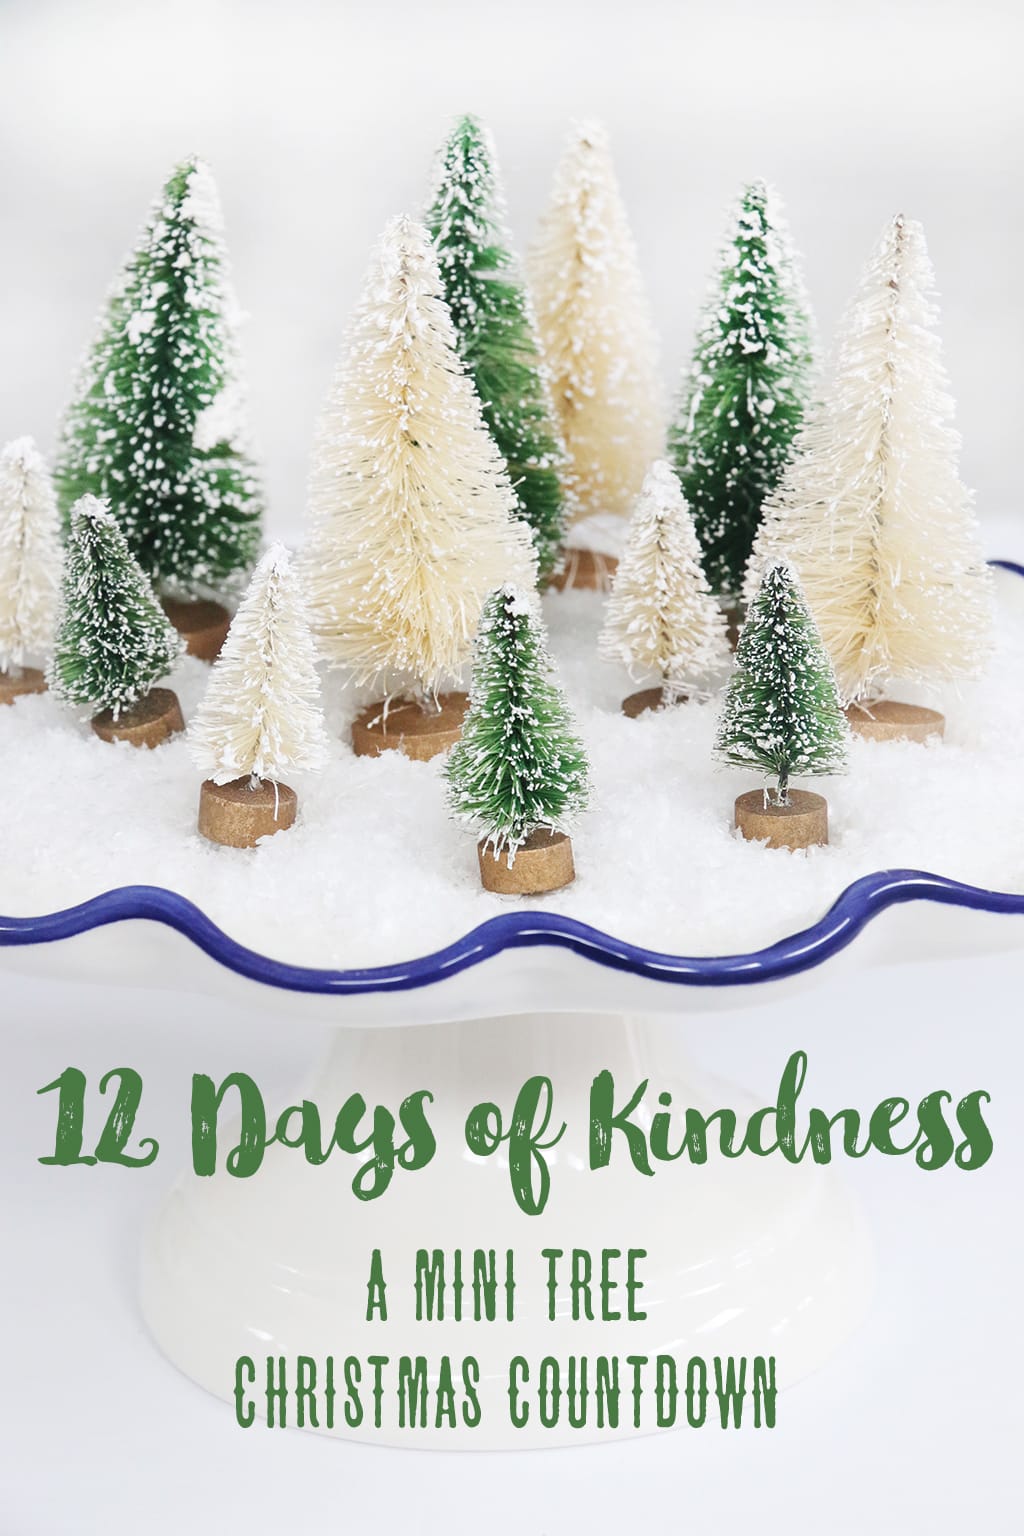 12 Days of Kindness Printable - A Christmas Countdown - A fun way to add family service to your Christmas celebration!